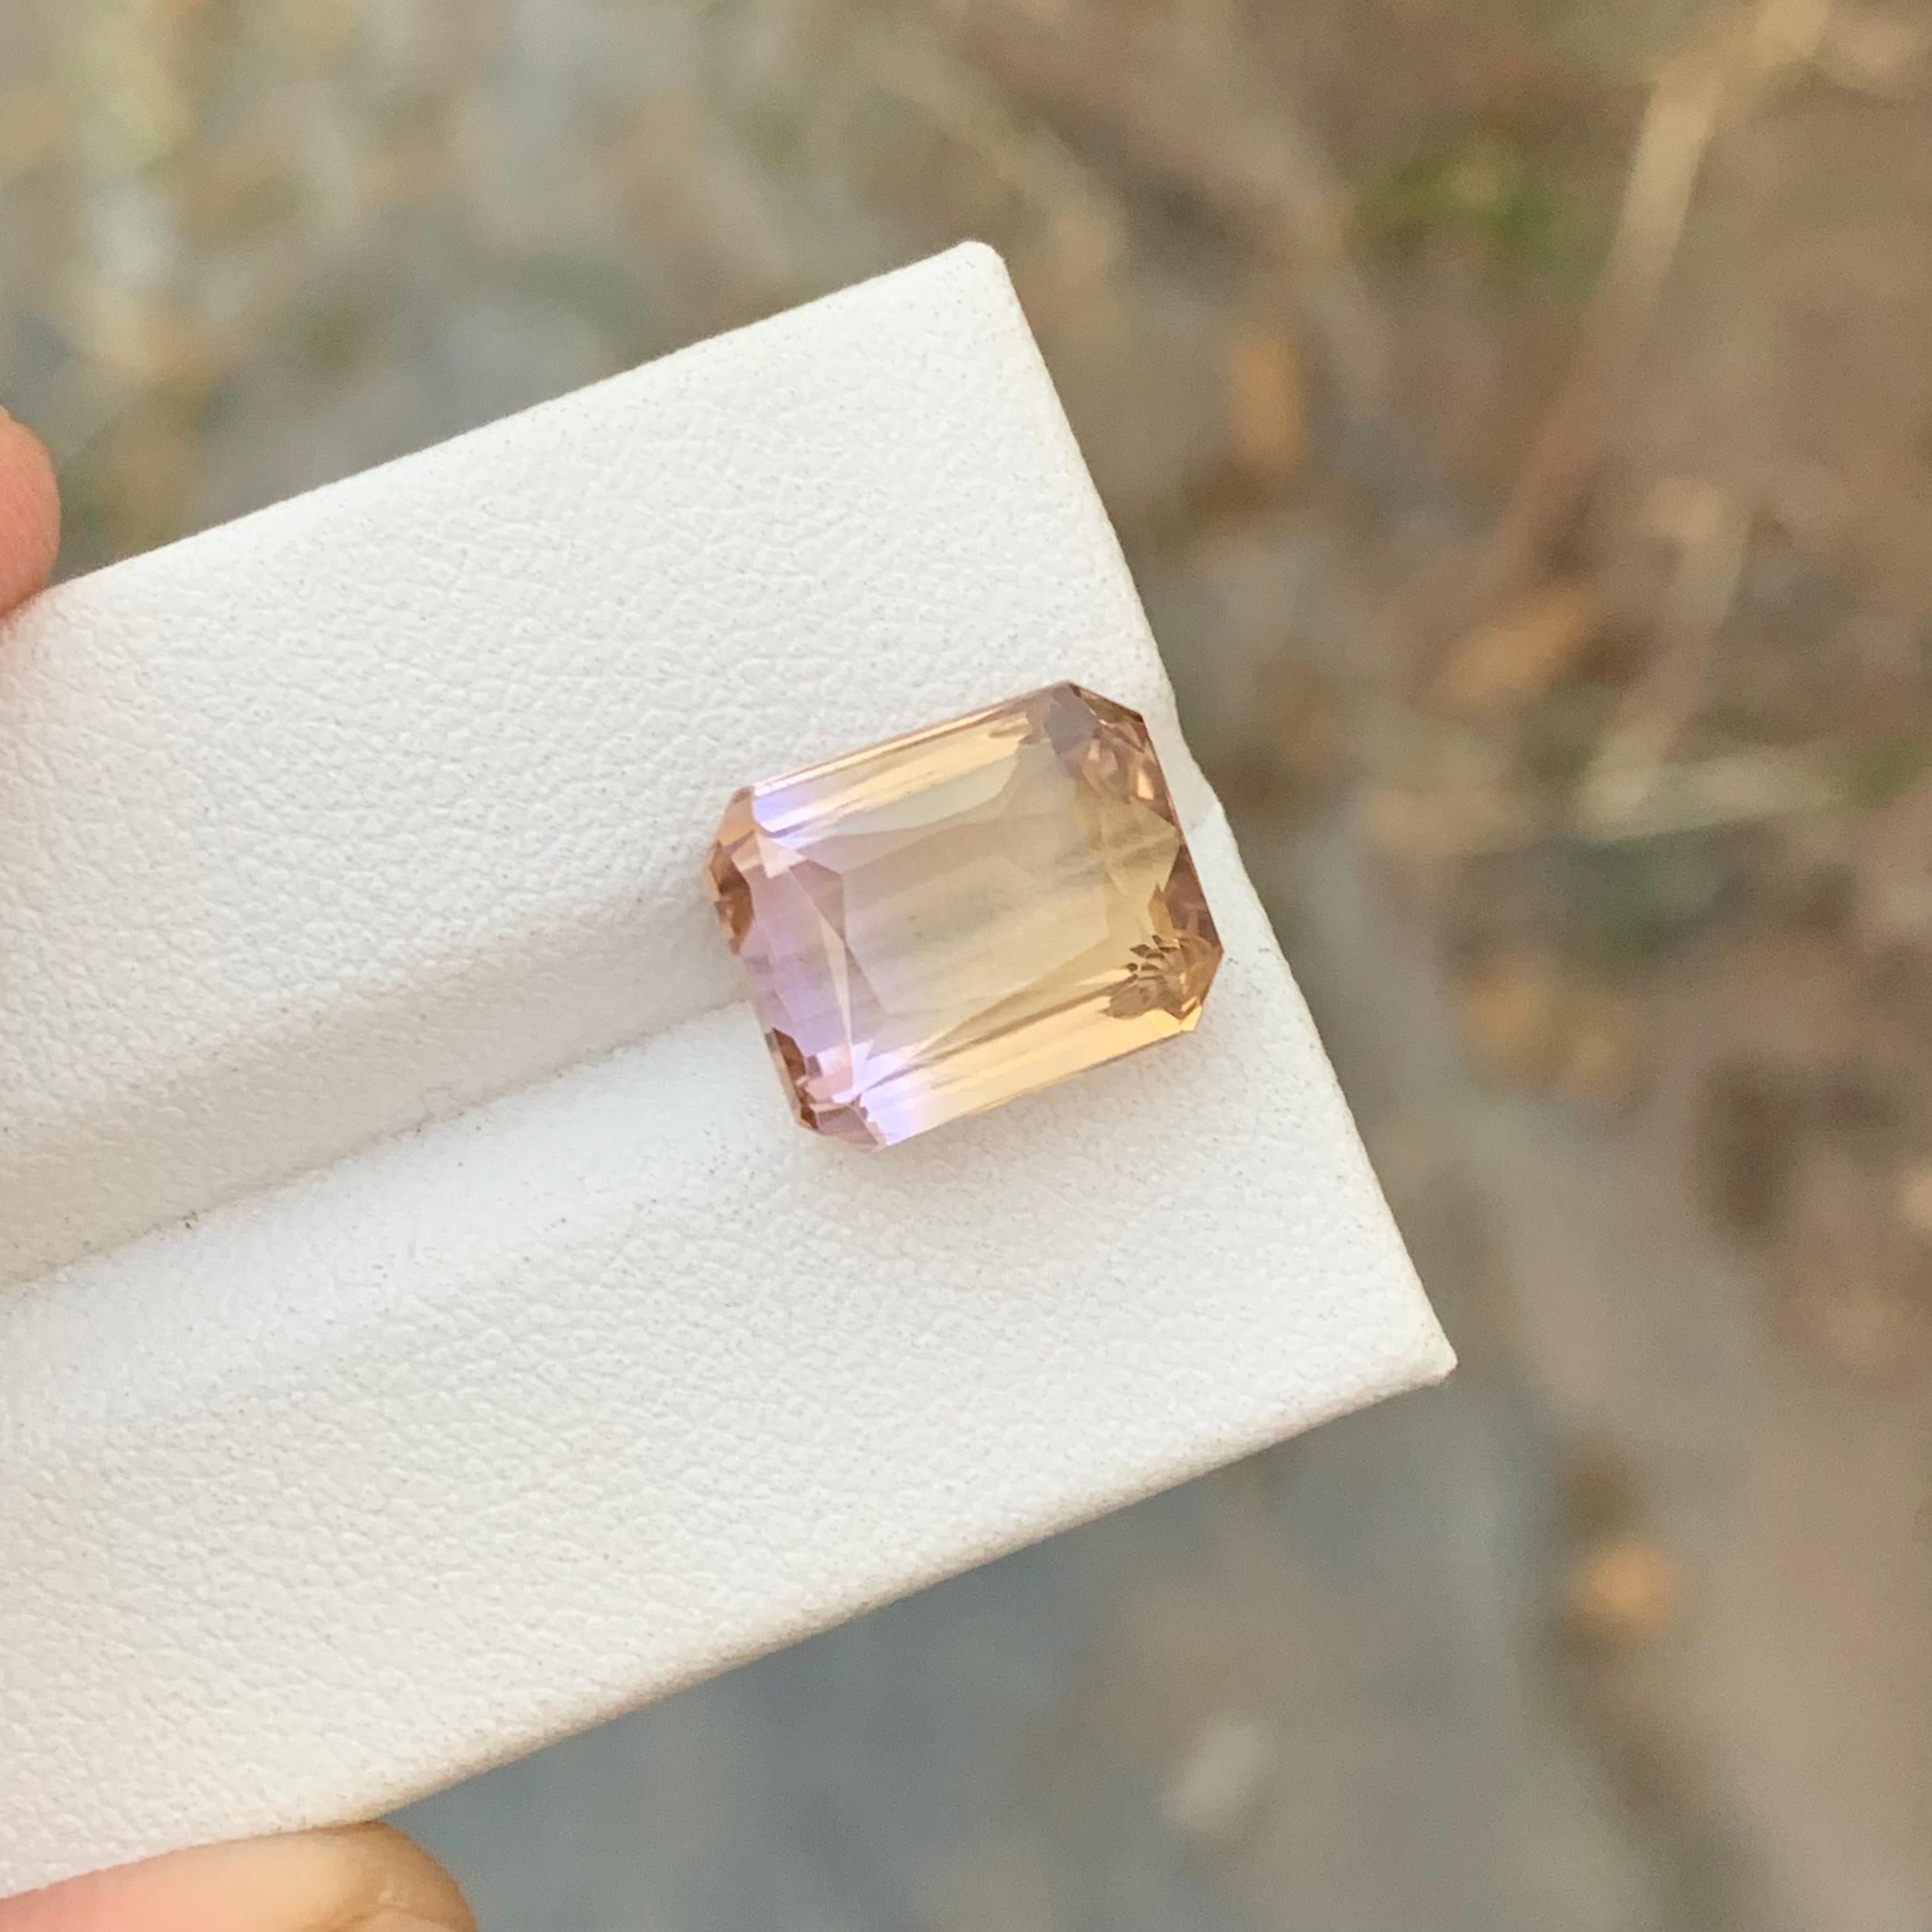 Loose Ametrine
Weight: 7.10 Carats
Dimension: 11.9 x 9.7 x 7.1 Mm
Origin: Brazil
Shape : Emerald 
Treatment: Non
Certificate: On Demand


Ametrine, a captivating and unique gemstone, seamlessly blends the enchanting colors of amethyst and citrine